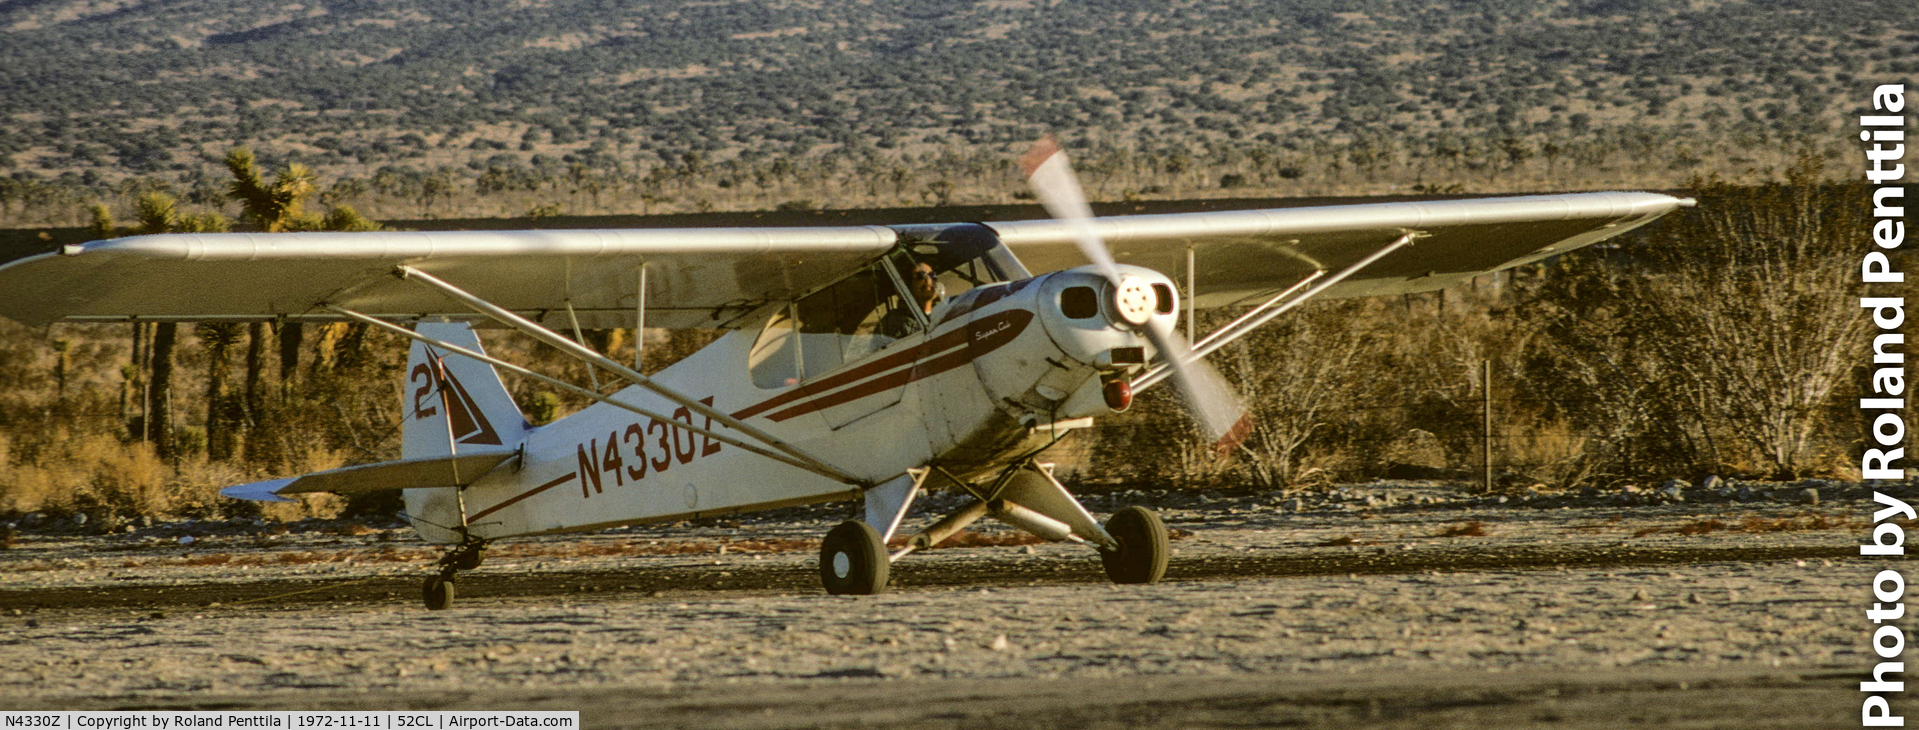 N4330Z, 1968 Piper PA-18-150 Super Cub C/N 18-8650, Being used as a tow plane for sailplane operations at Adelanto Airfield